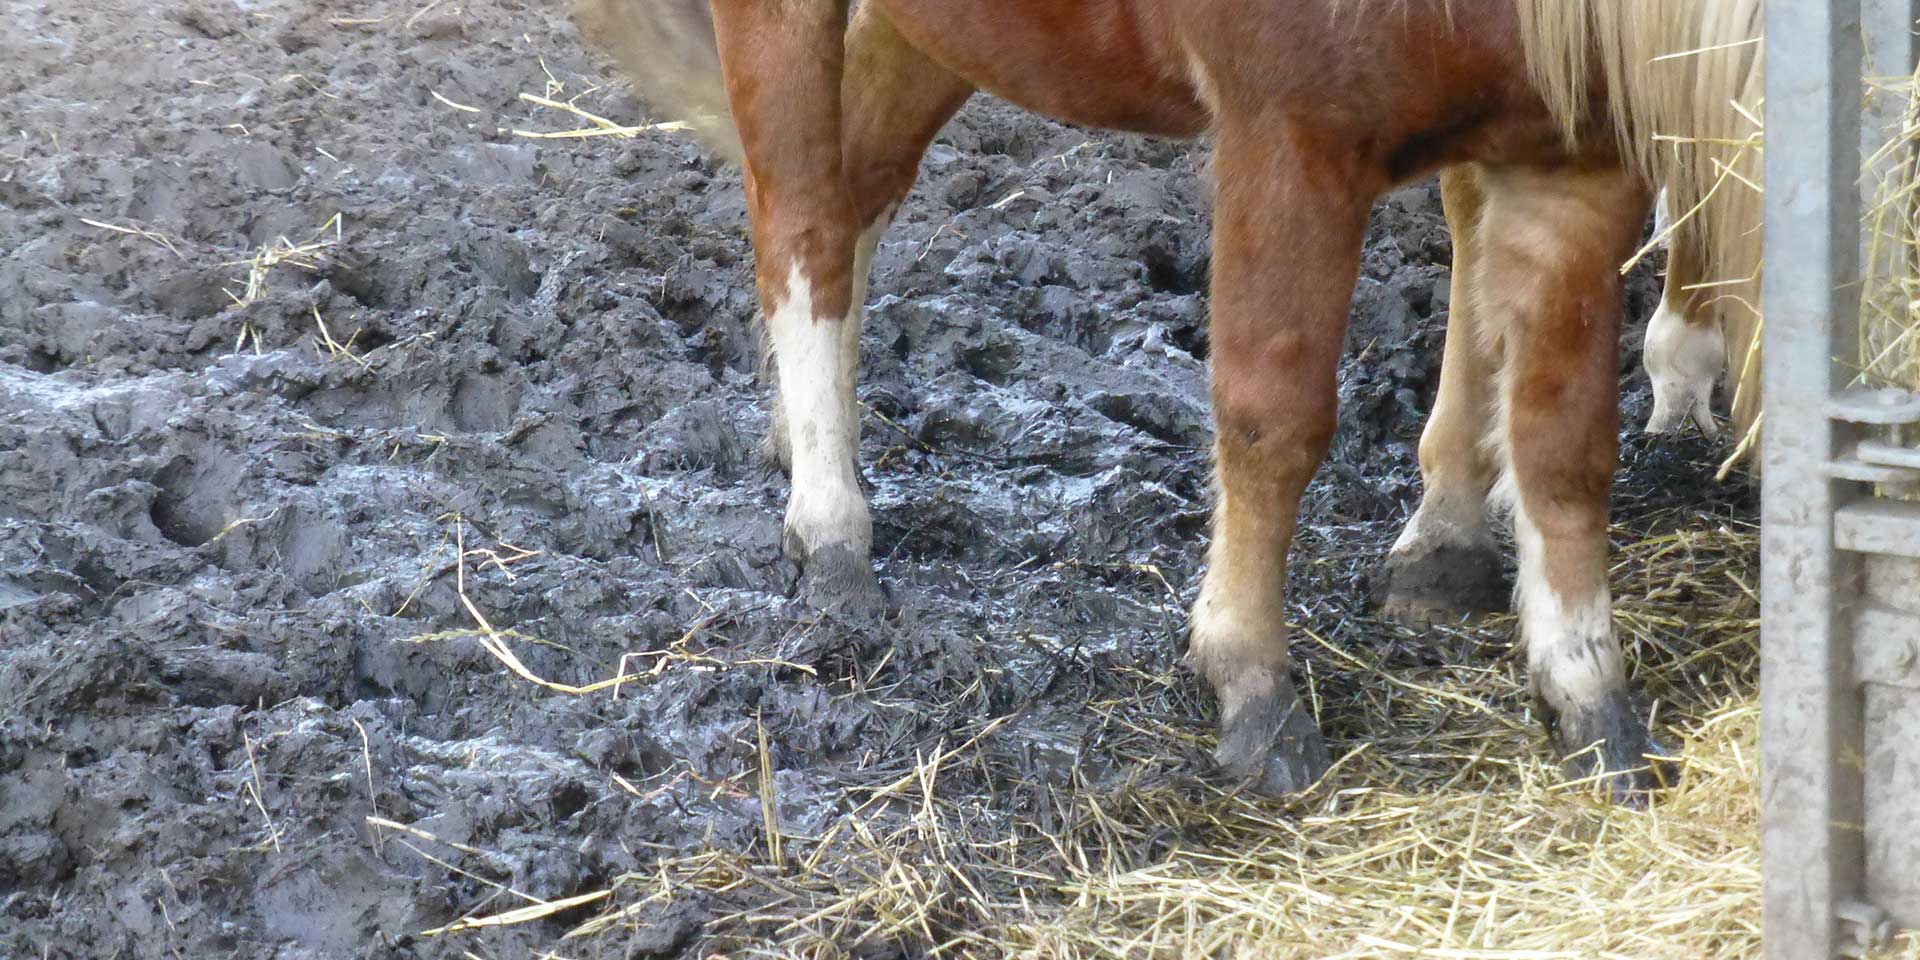 Muddy, unhygienic paddocks are a health risk for horses.